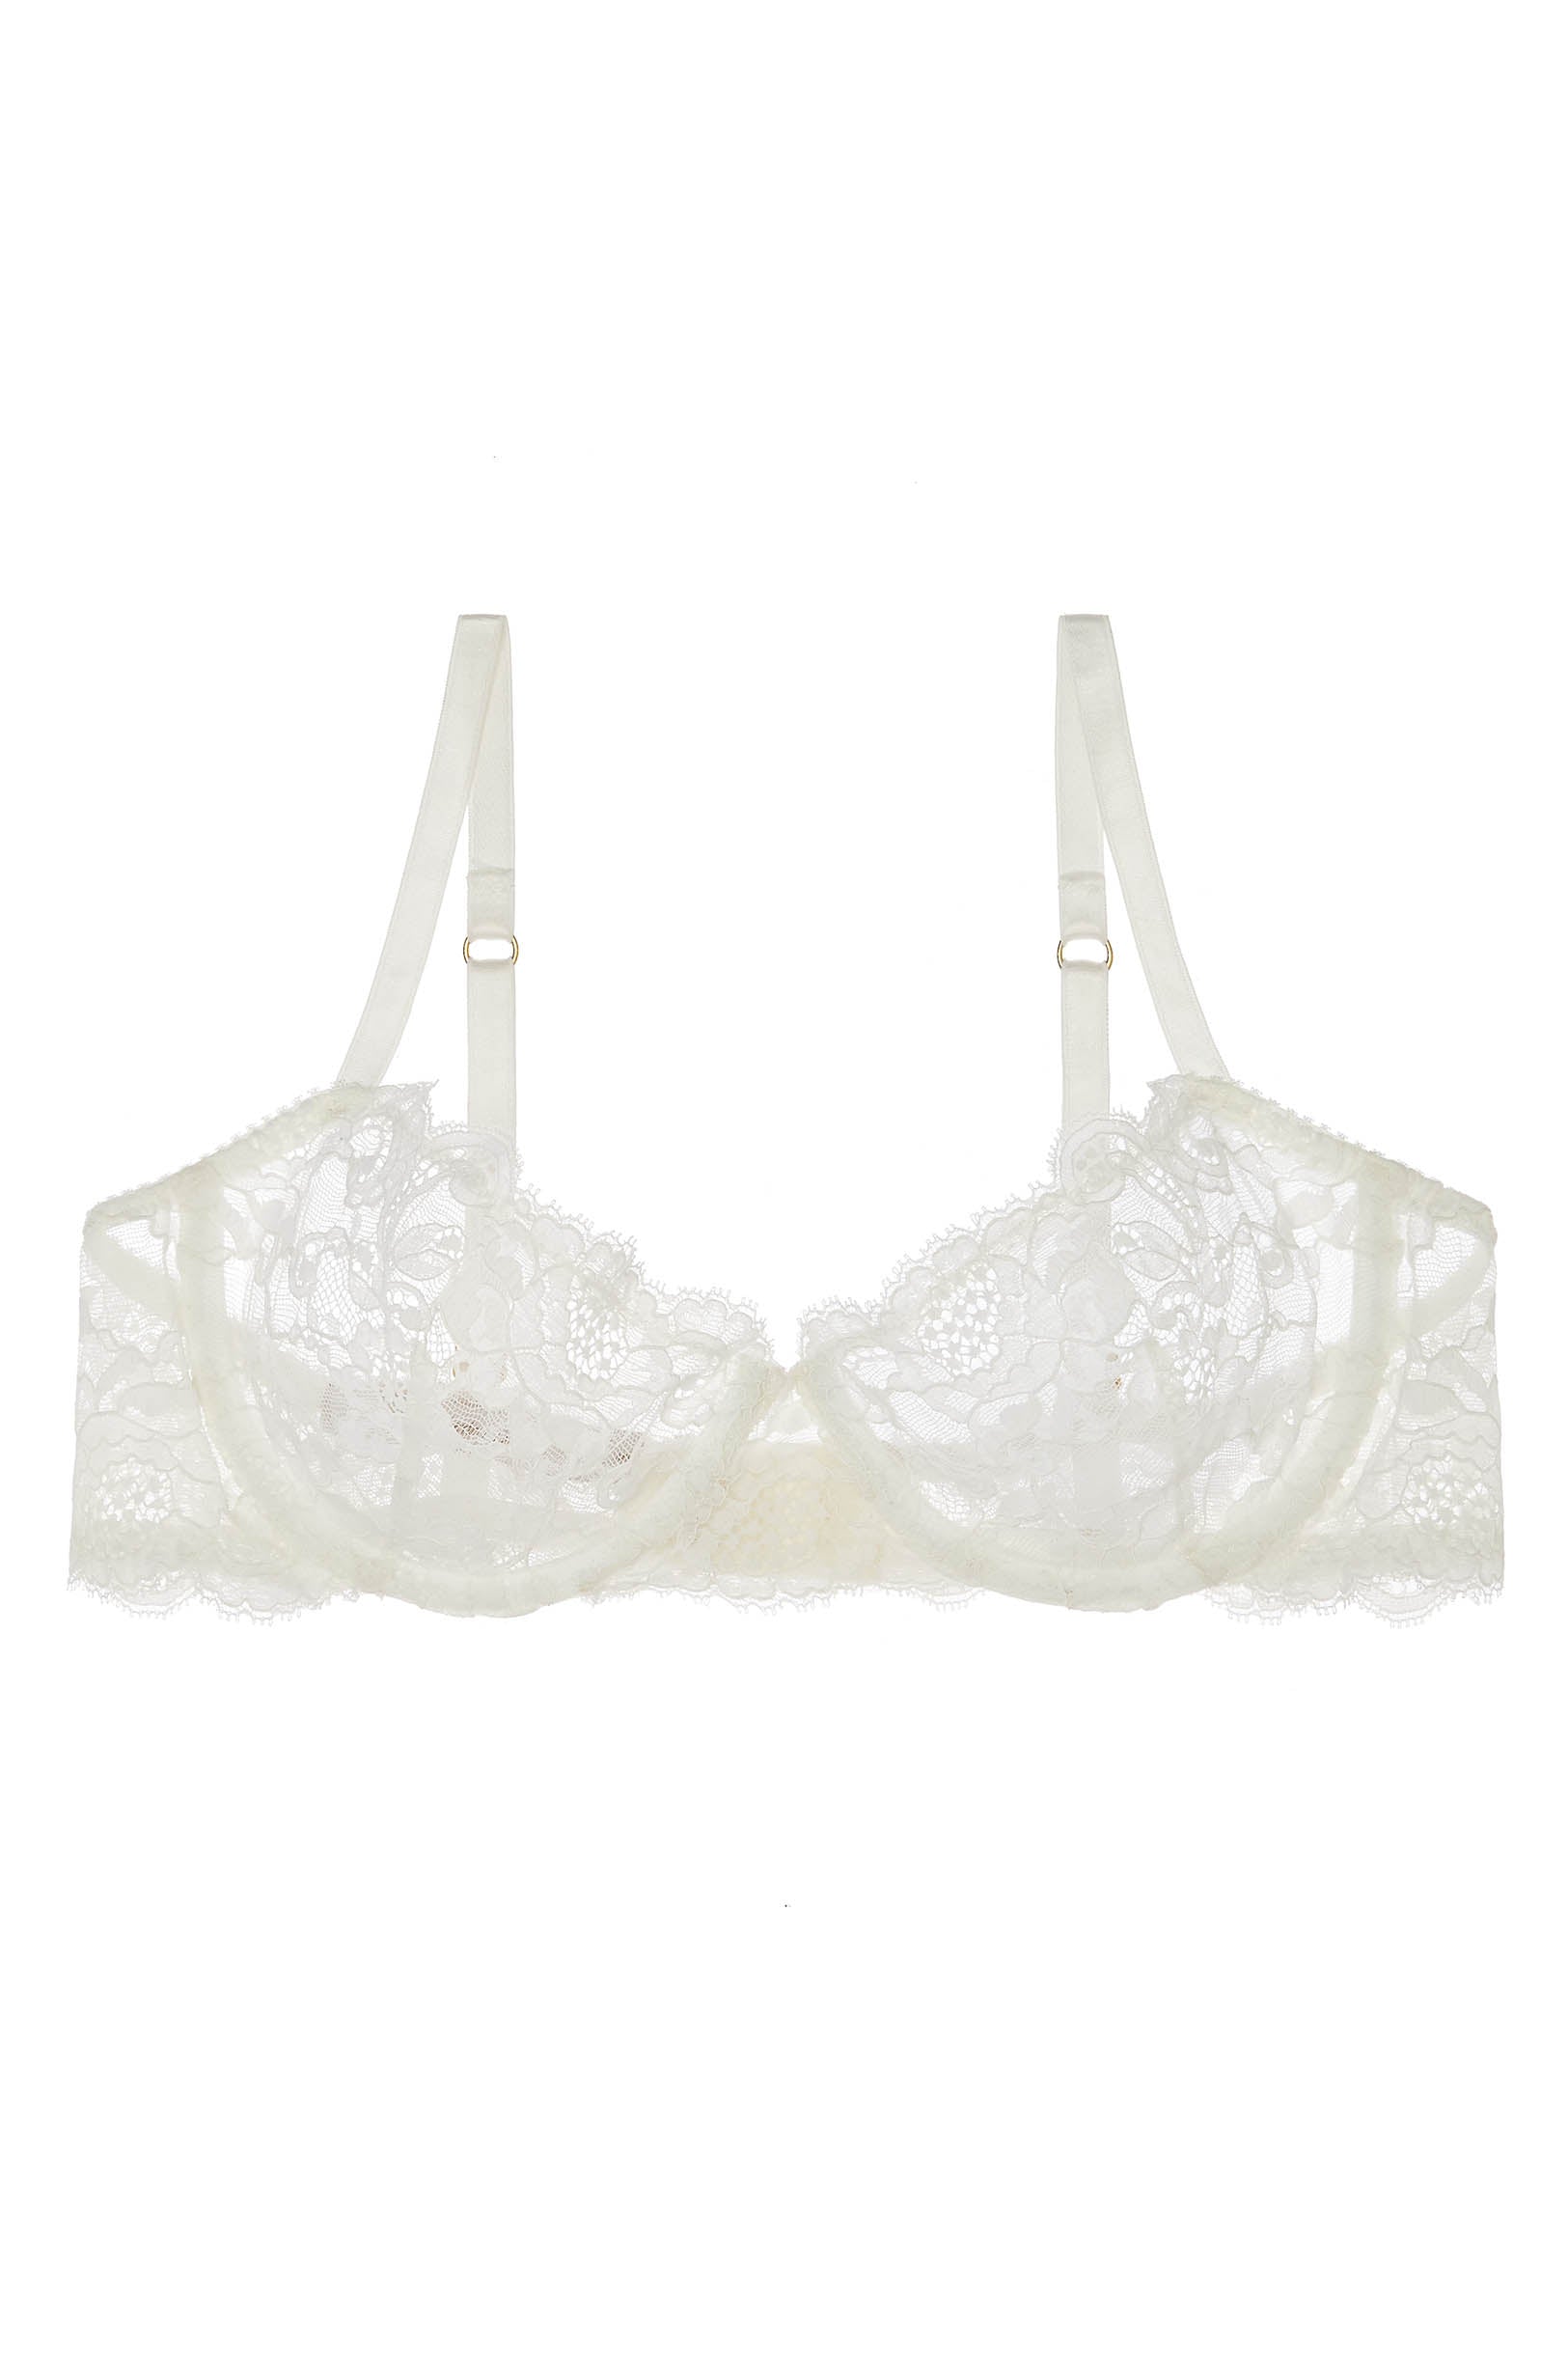 Peony French lace underwire balconette demi cup bra ...